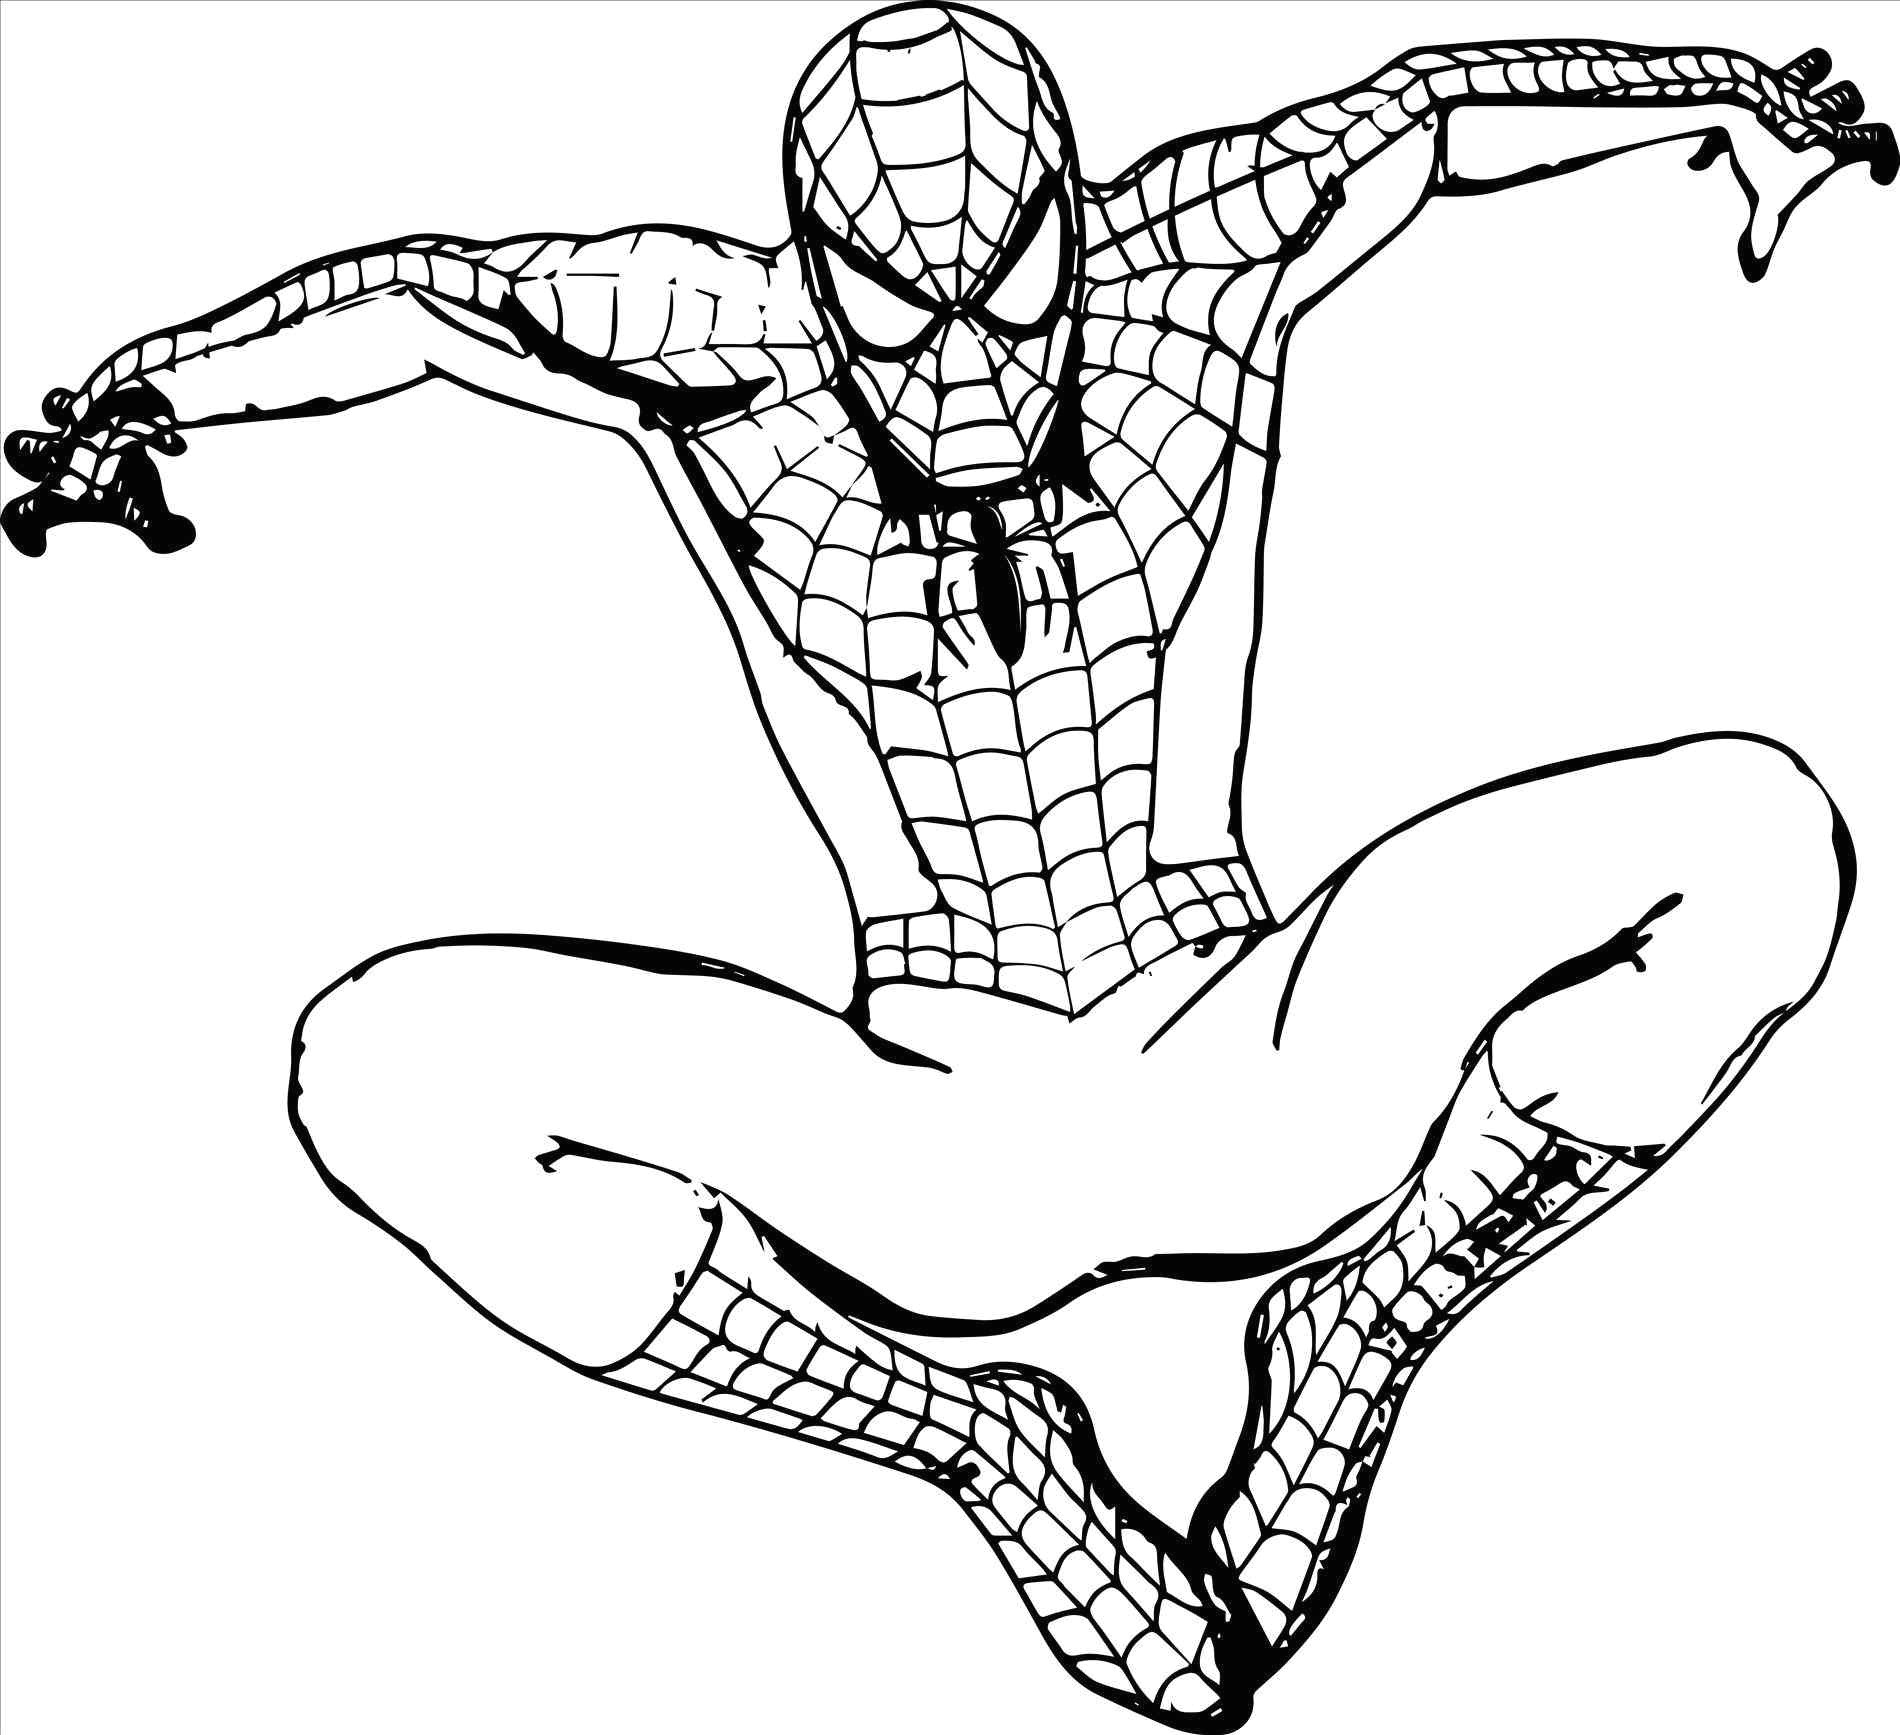 Drawing A Easy Animal Spiderman Coloring Pages to Print Luxury Superheroes Easy to Draw